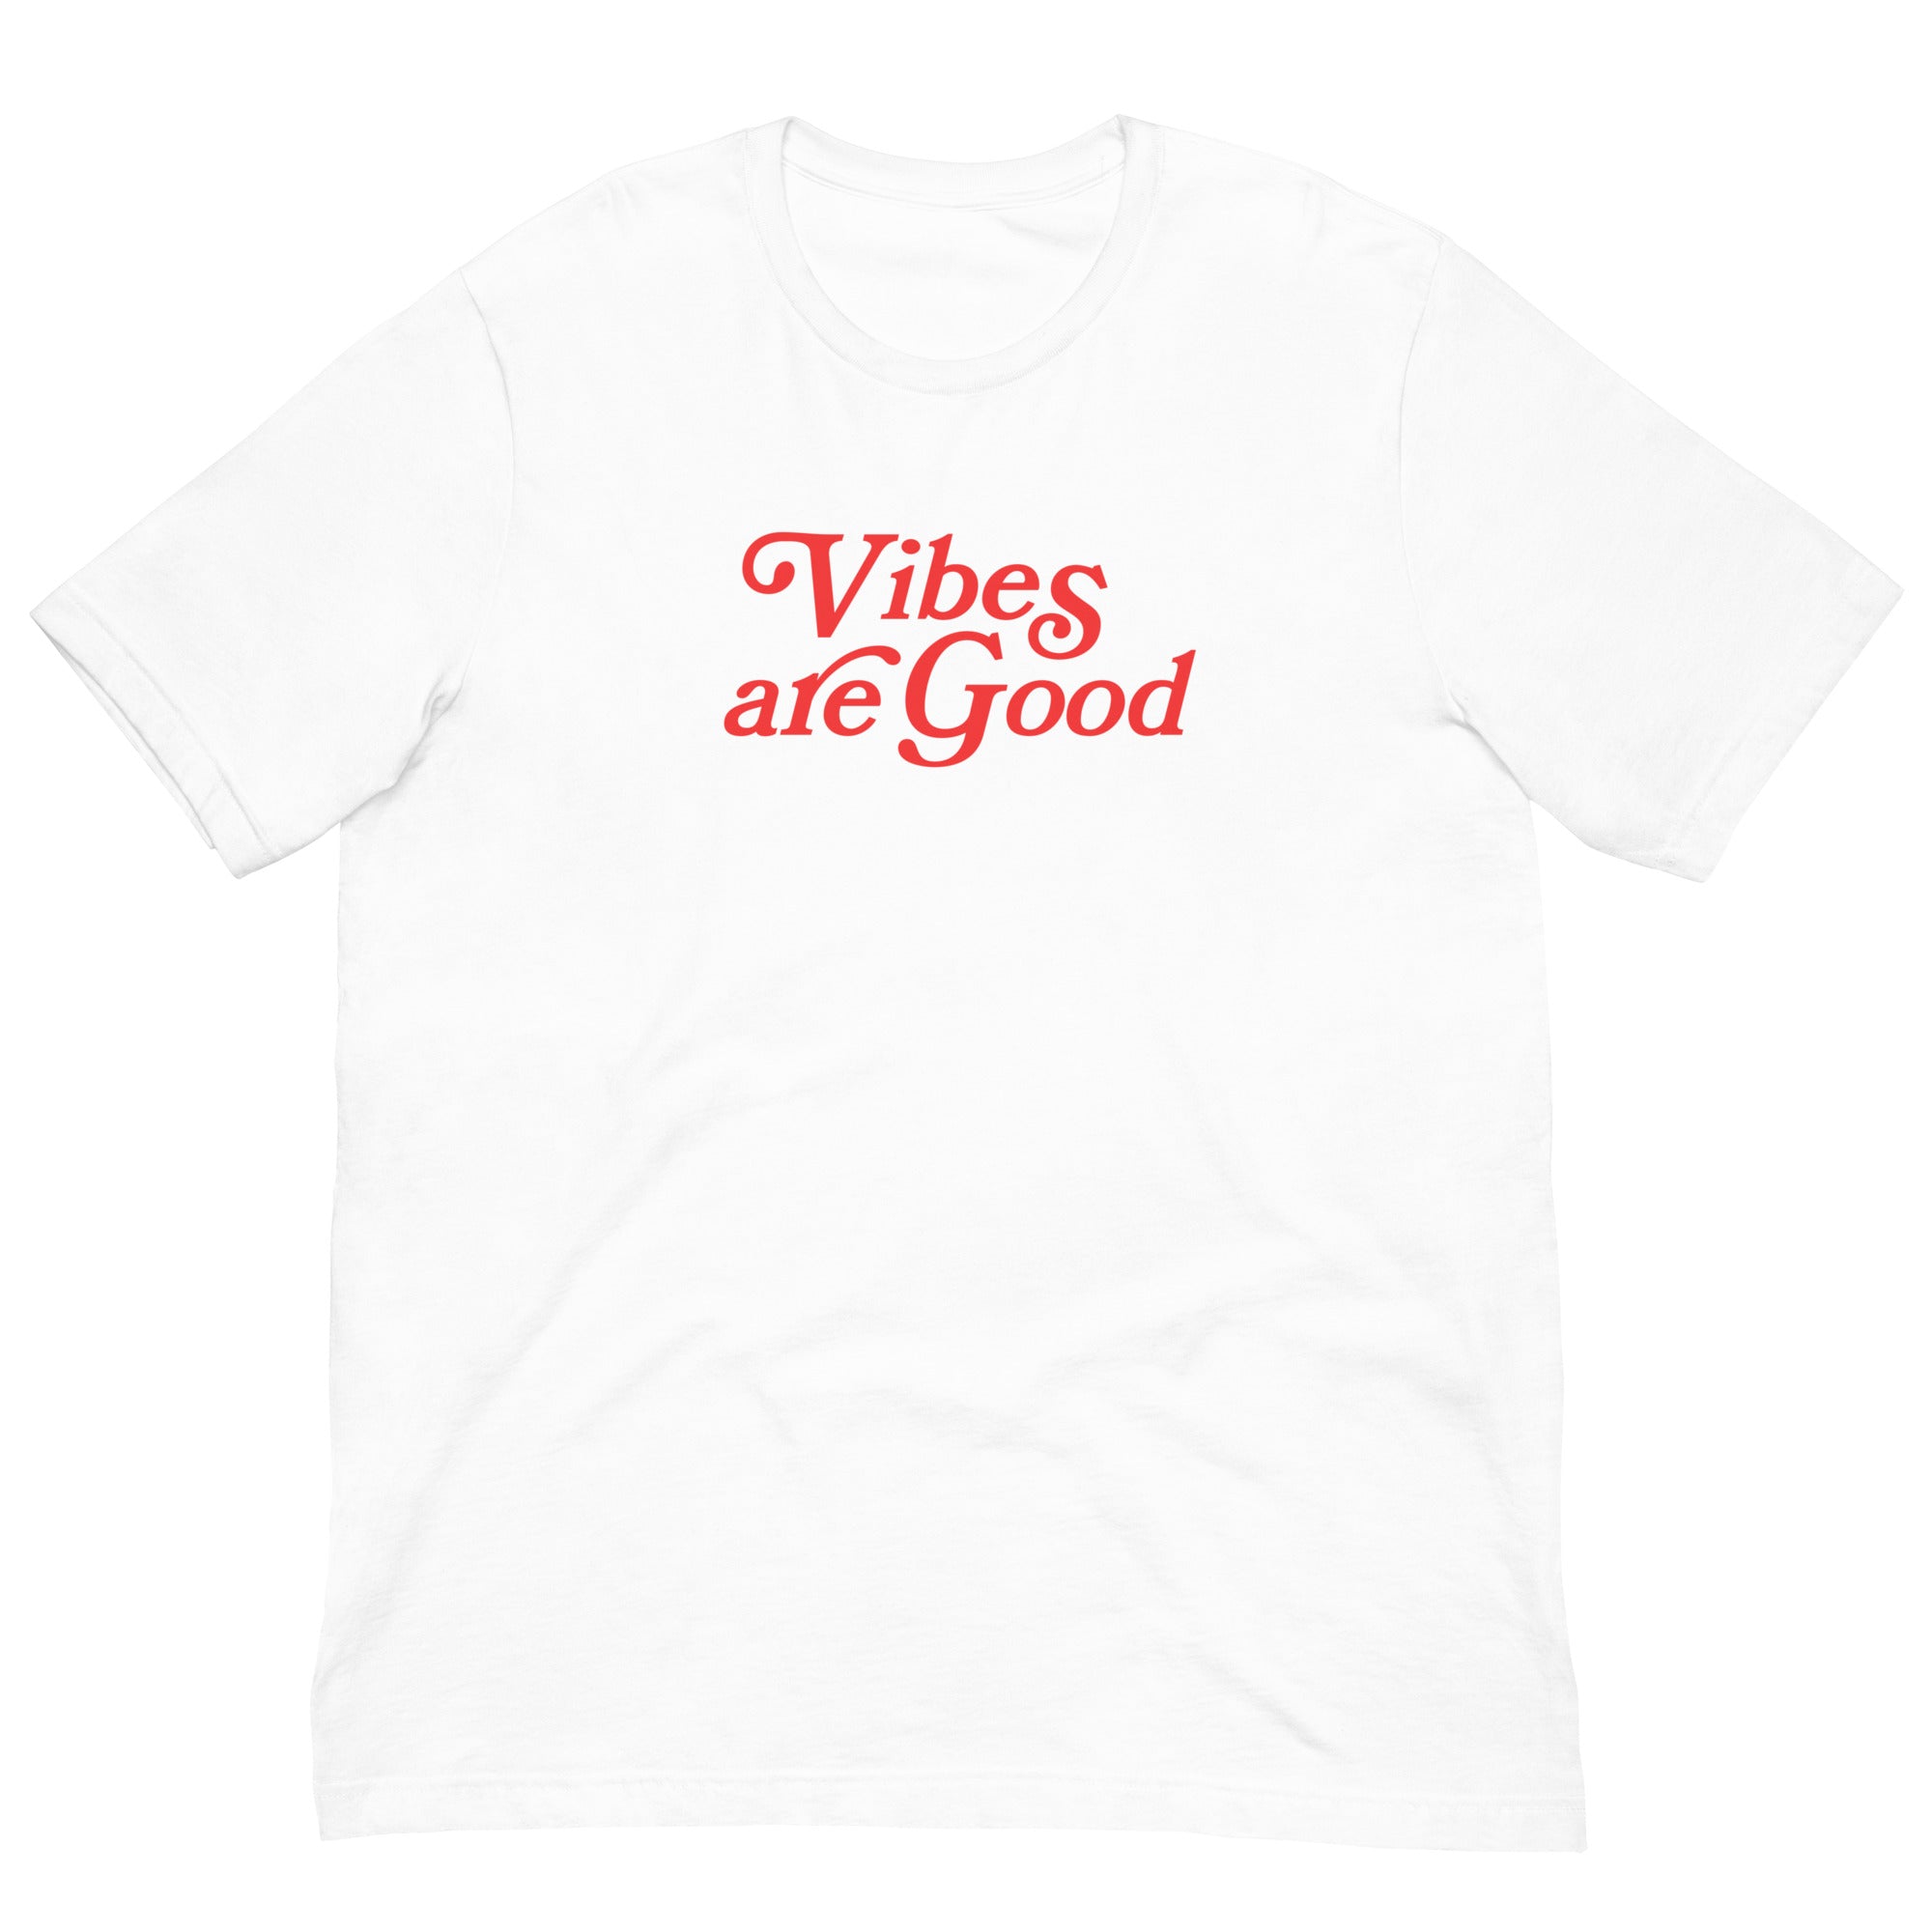 Vibes are Good Tee